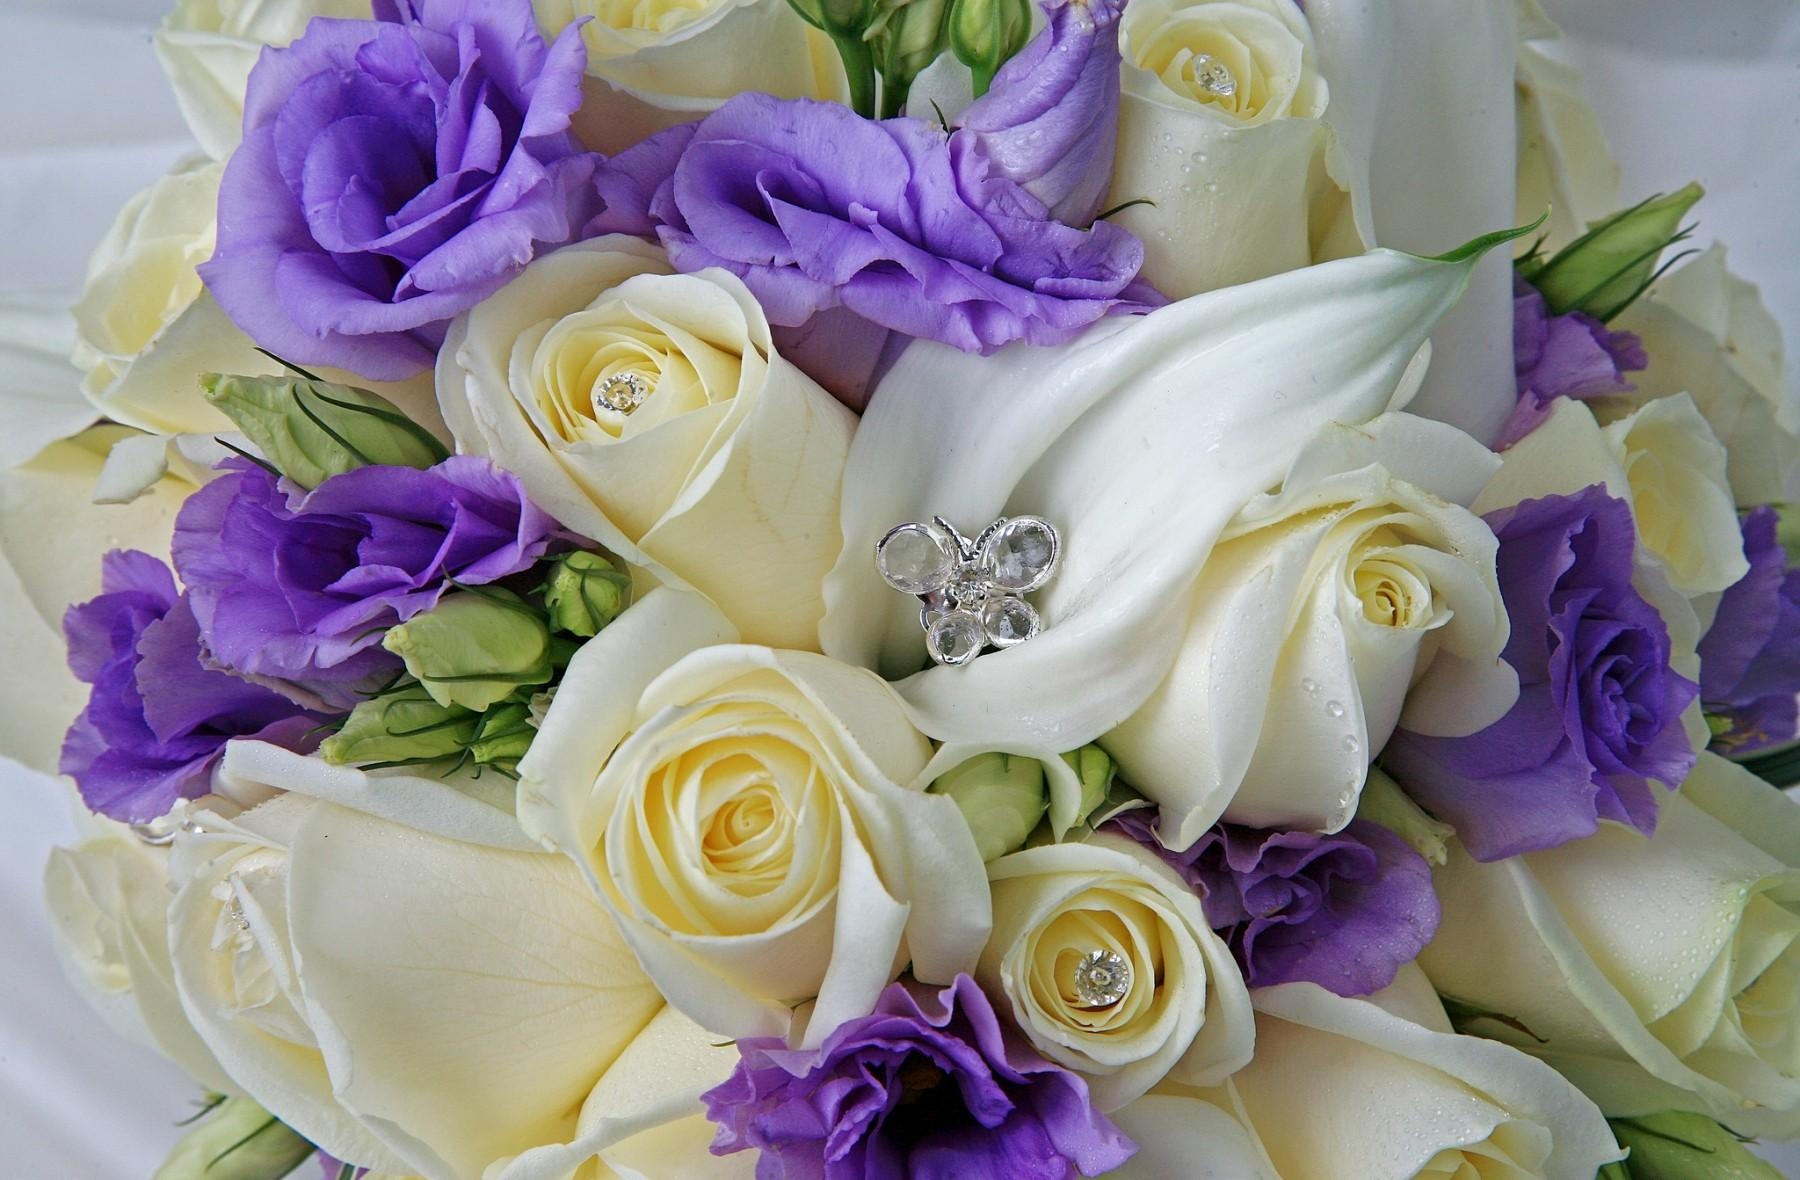 drops, roses, flowers, decorations, bouquet, lisiantus russell, lisianthus russell 32K